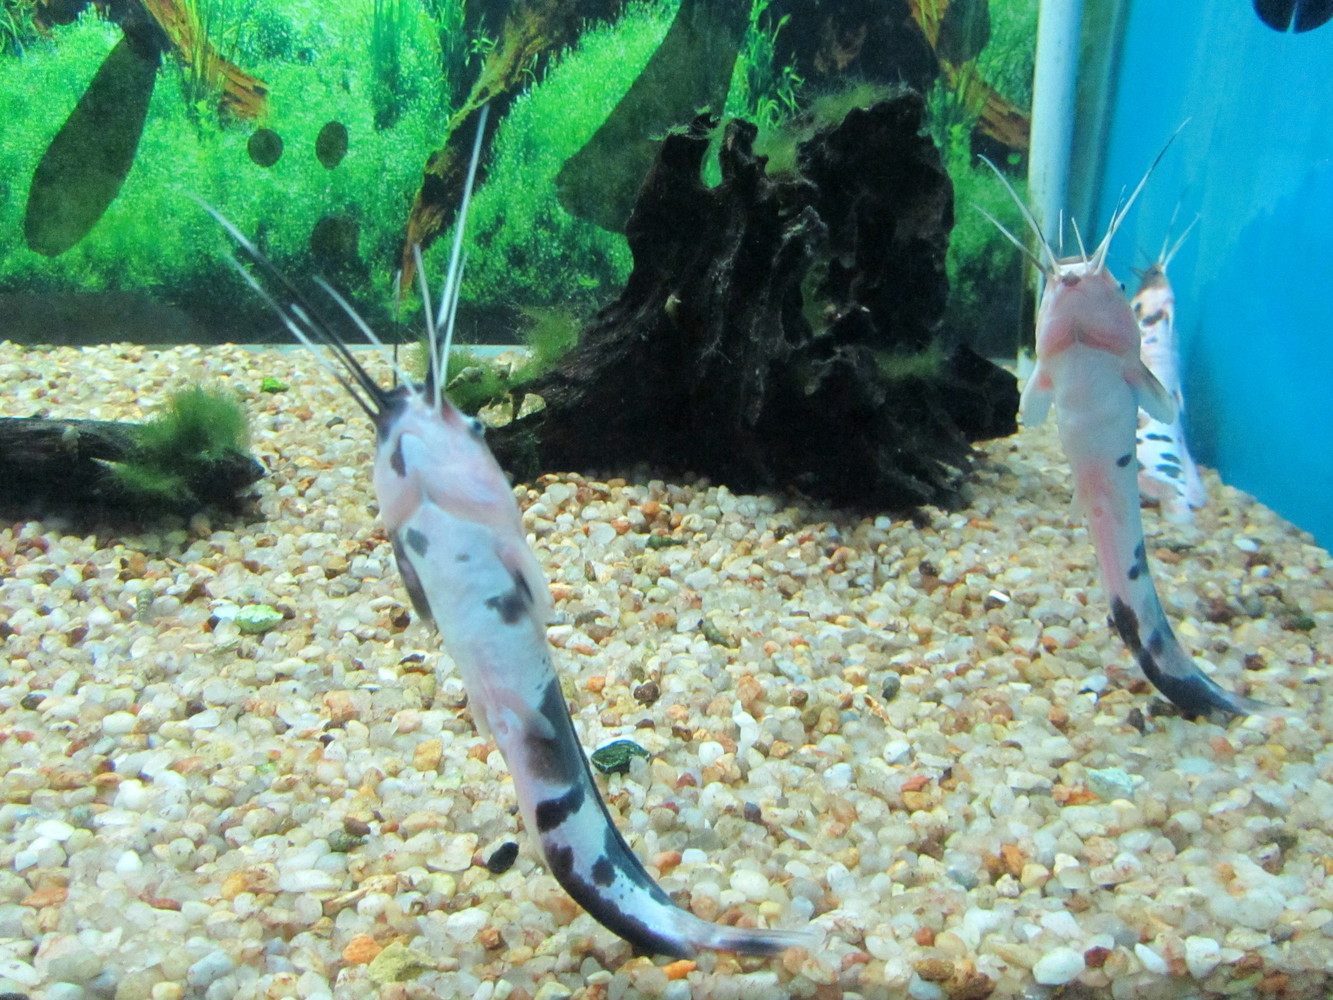 Three catfish in an aquarium with their barbels pointed up